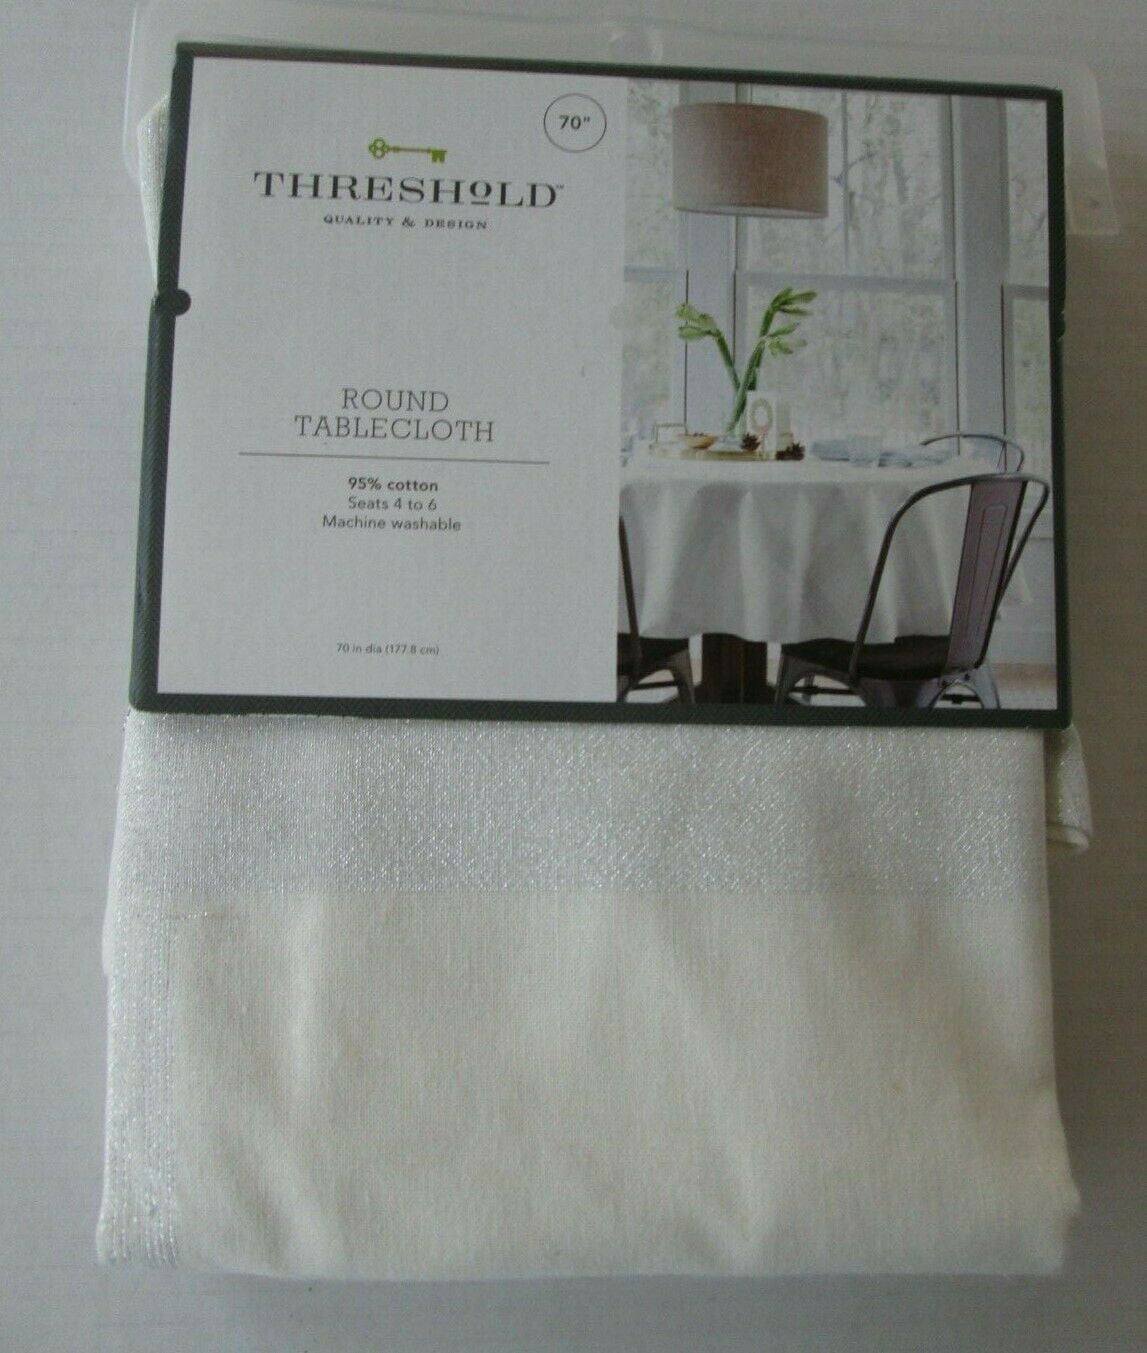 NEW NIP Christmas Essential Home ROUND gold Damask Tablecloth 70" 